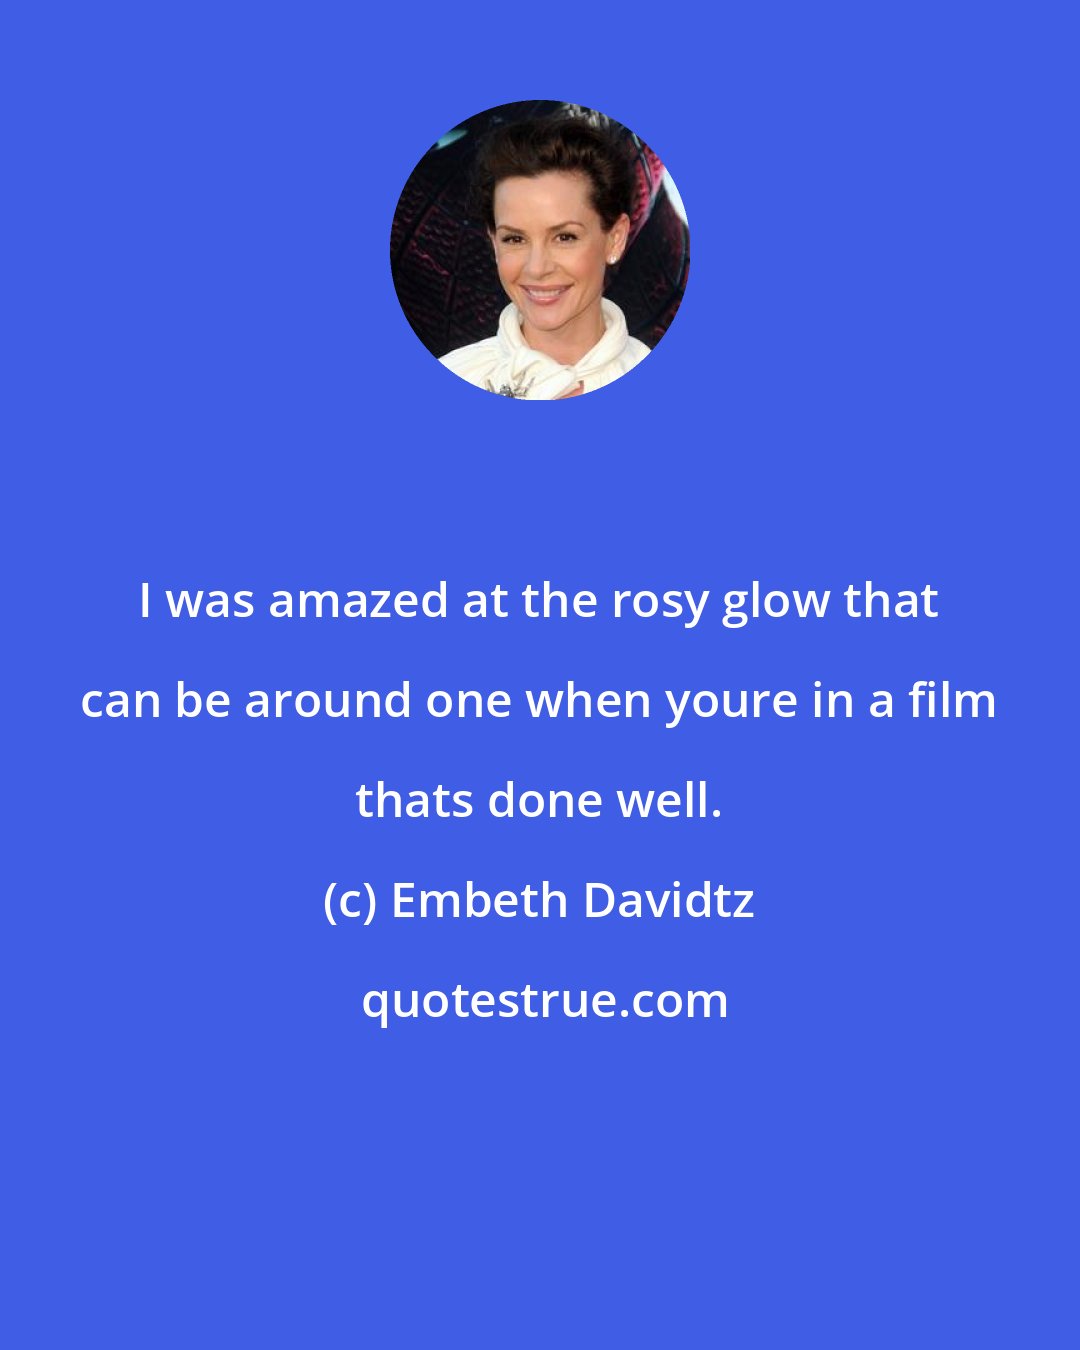 Embeth Davidtz: I was amazed at the rosy glow that can be around one when youre in a film thats done well.